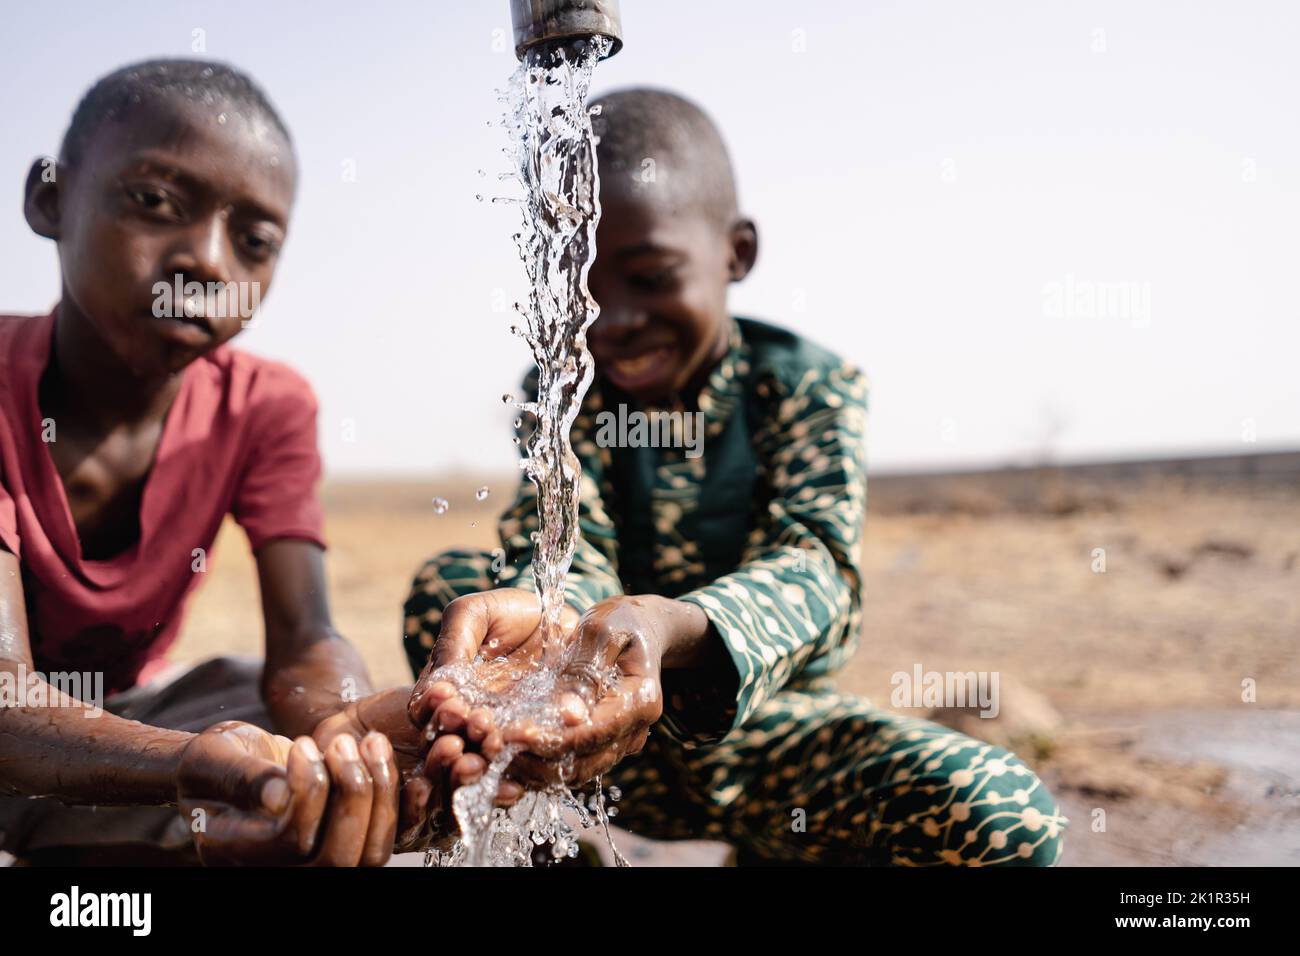 Two African toddlers playing with the water that flows from a rural faucet on the outskirts of their village; concept of water scarcity Stock Photo